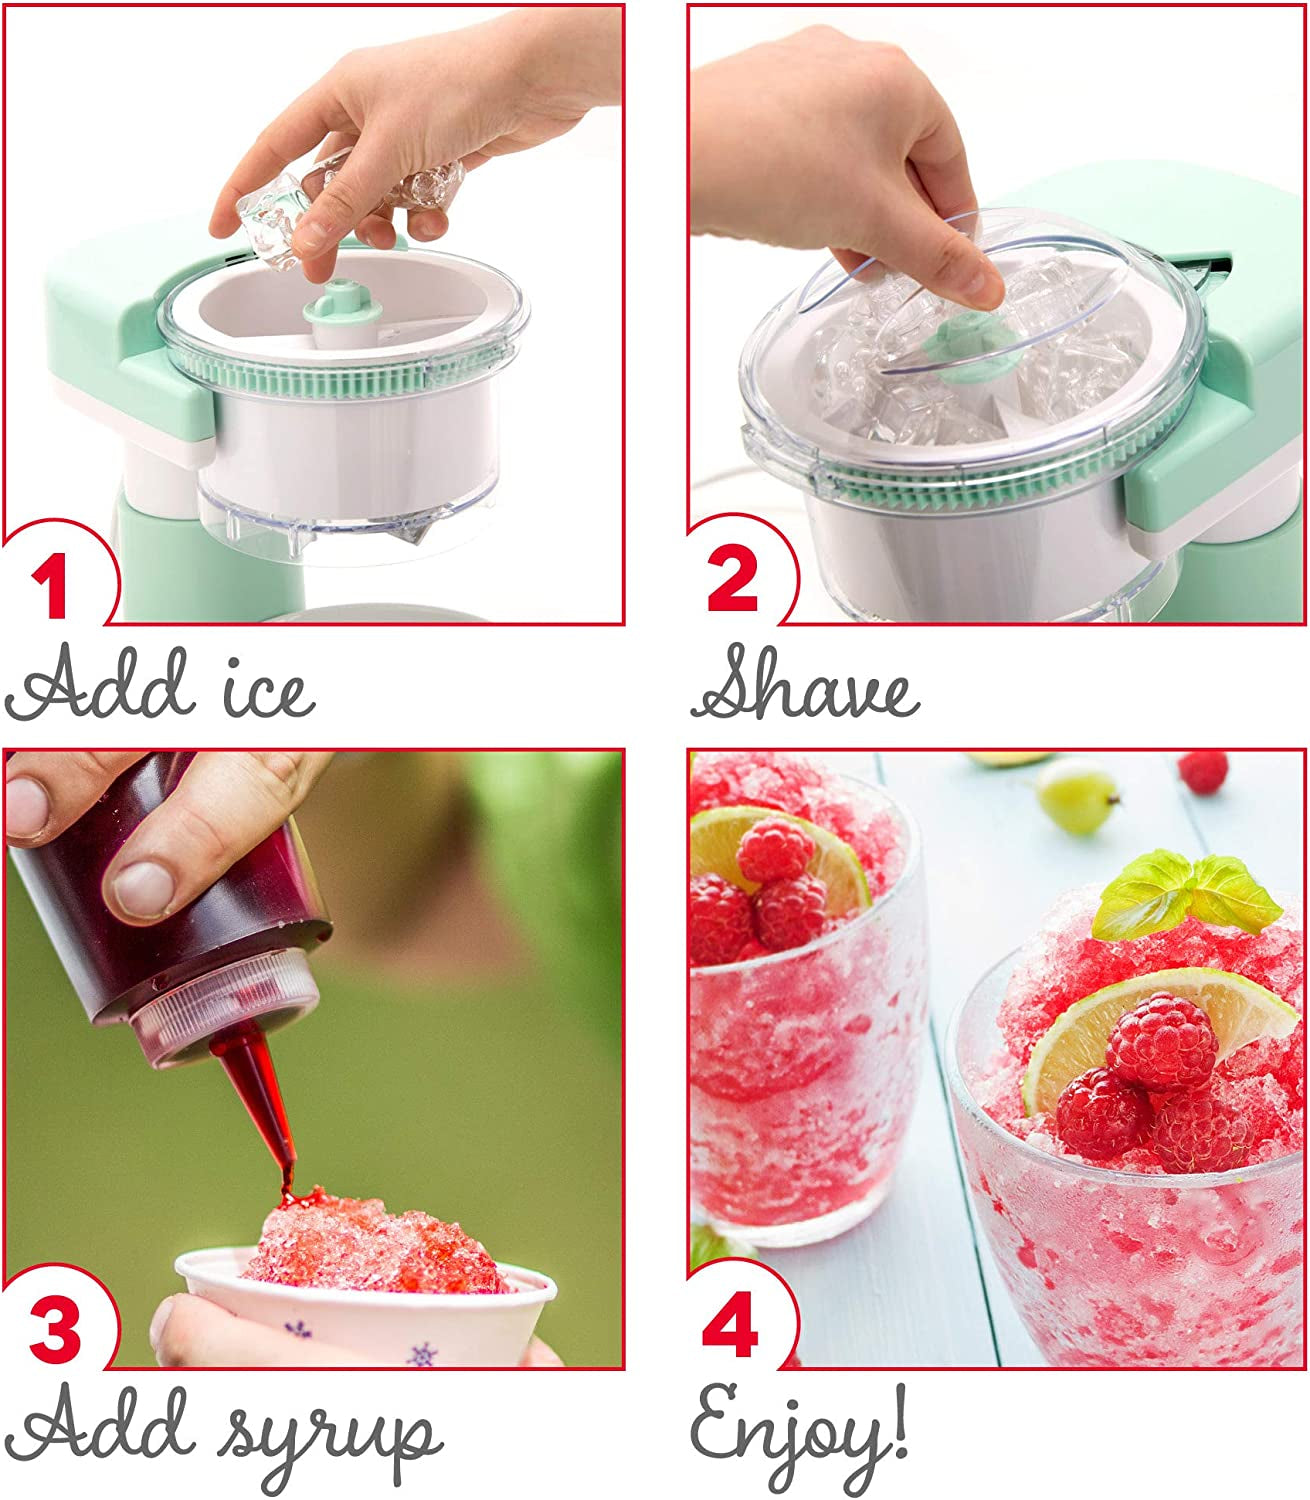 DASH Shaved Ice Maker + Slushie Machine with Stainless Steel Blades for Snow Cone, Margarita + Frozen Cocktails, Organic, Sugar Free, Flavored Healthy Snacks for Kids & Adults - Aqua